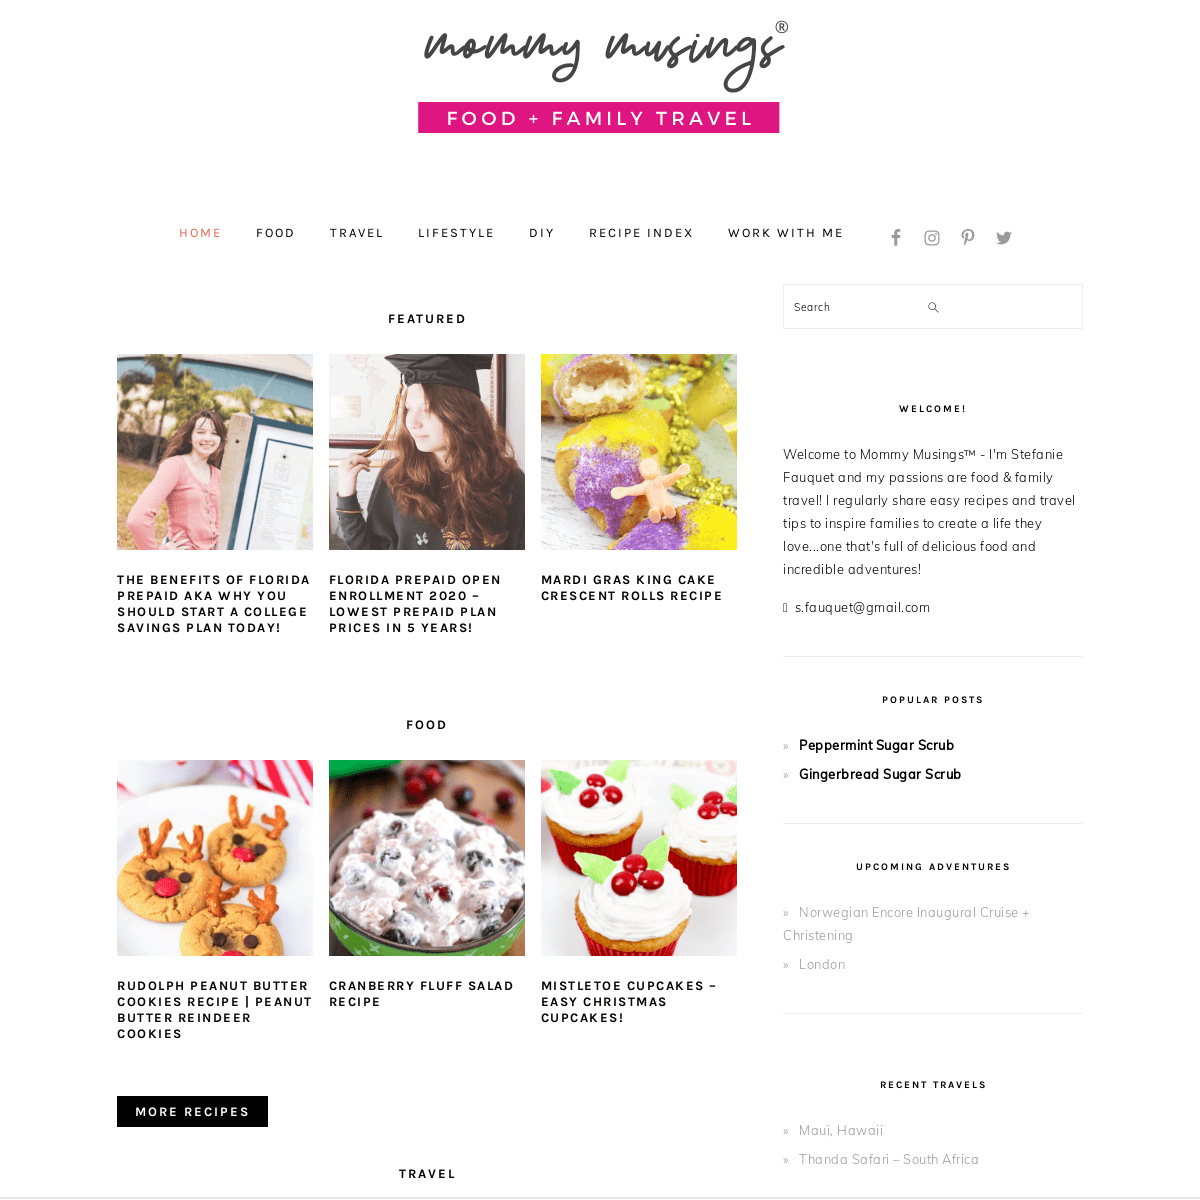 A complete backup of mommymusings.com